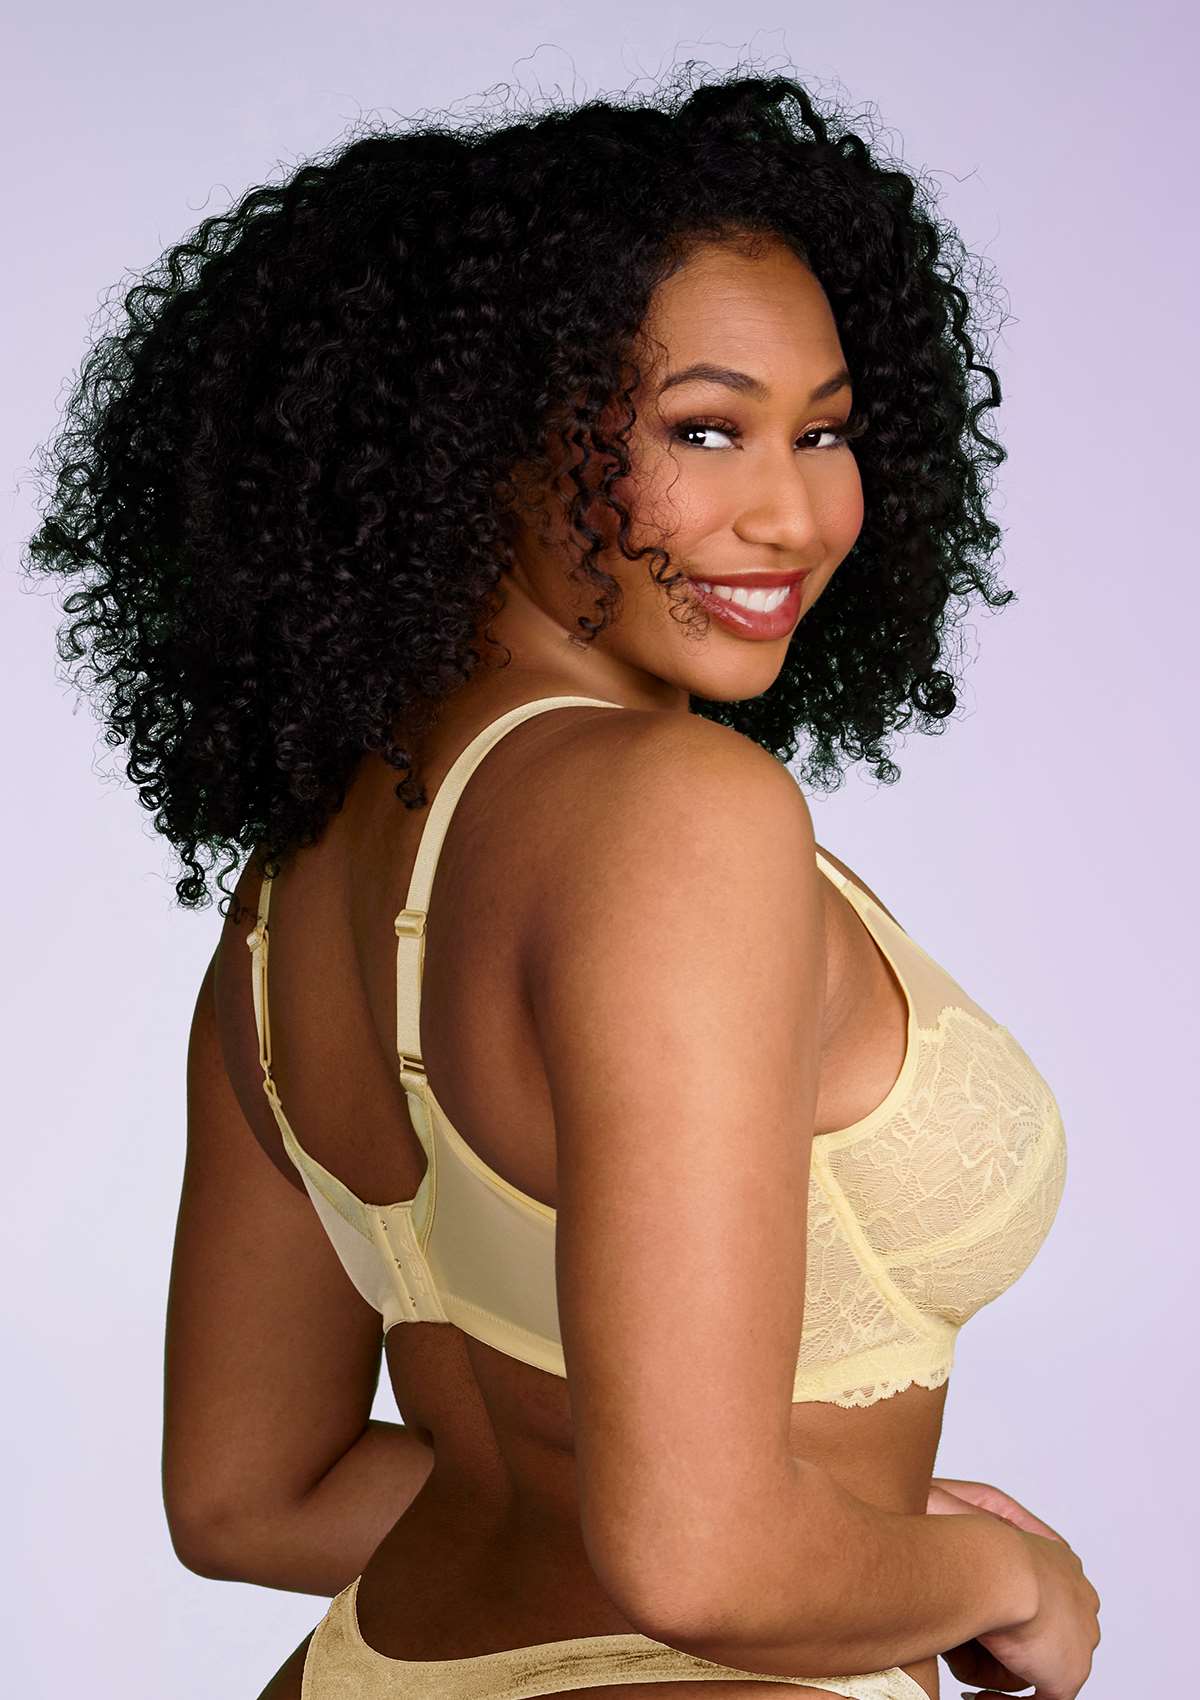 HSIA Blossom Full Coverage Side Support Bra: Designed For Heavy Busts - Beige / 42 / DDD/F